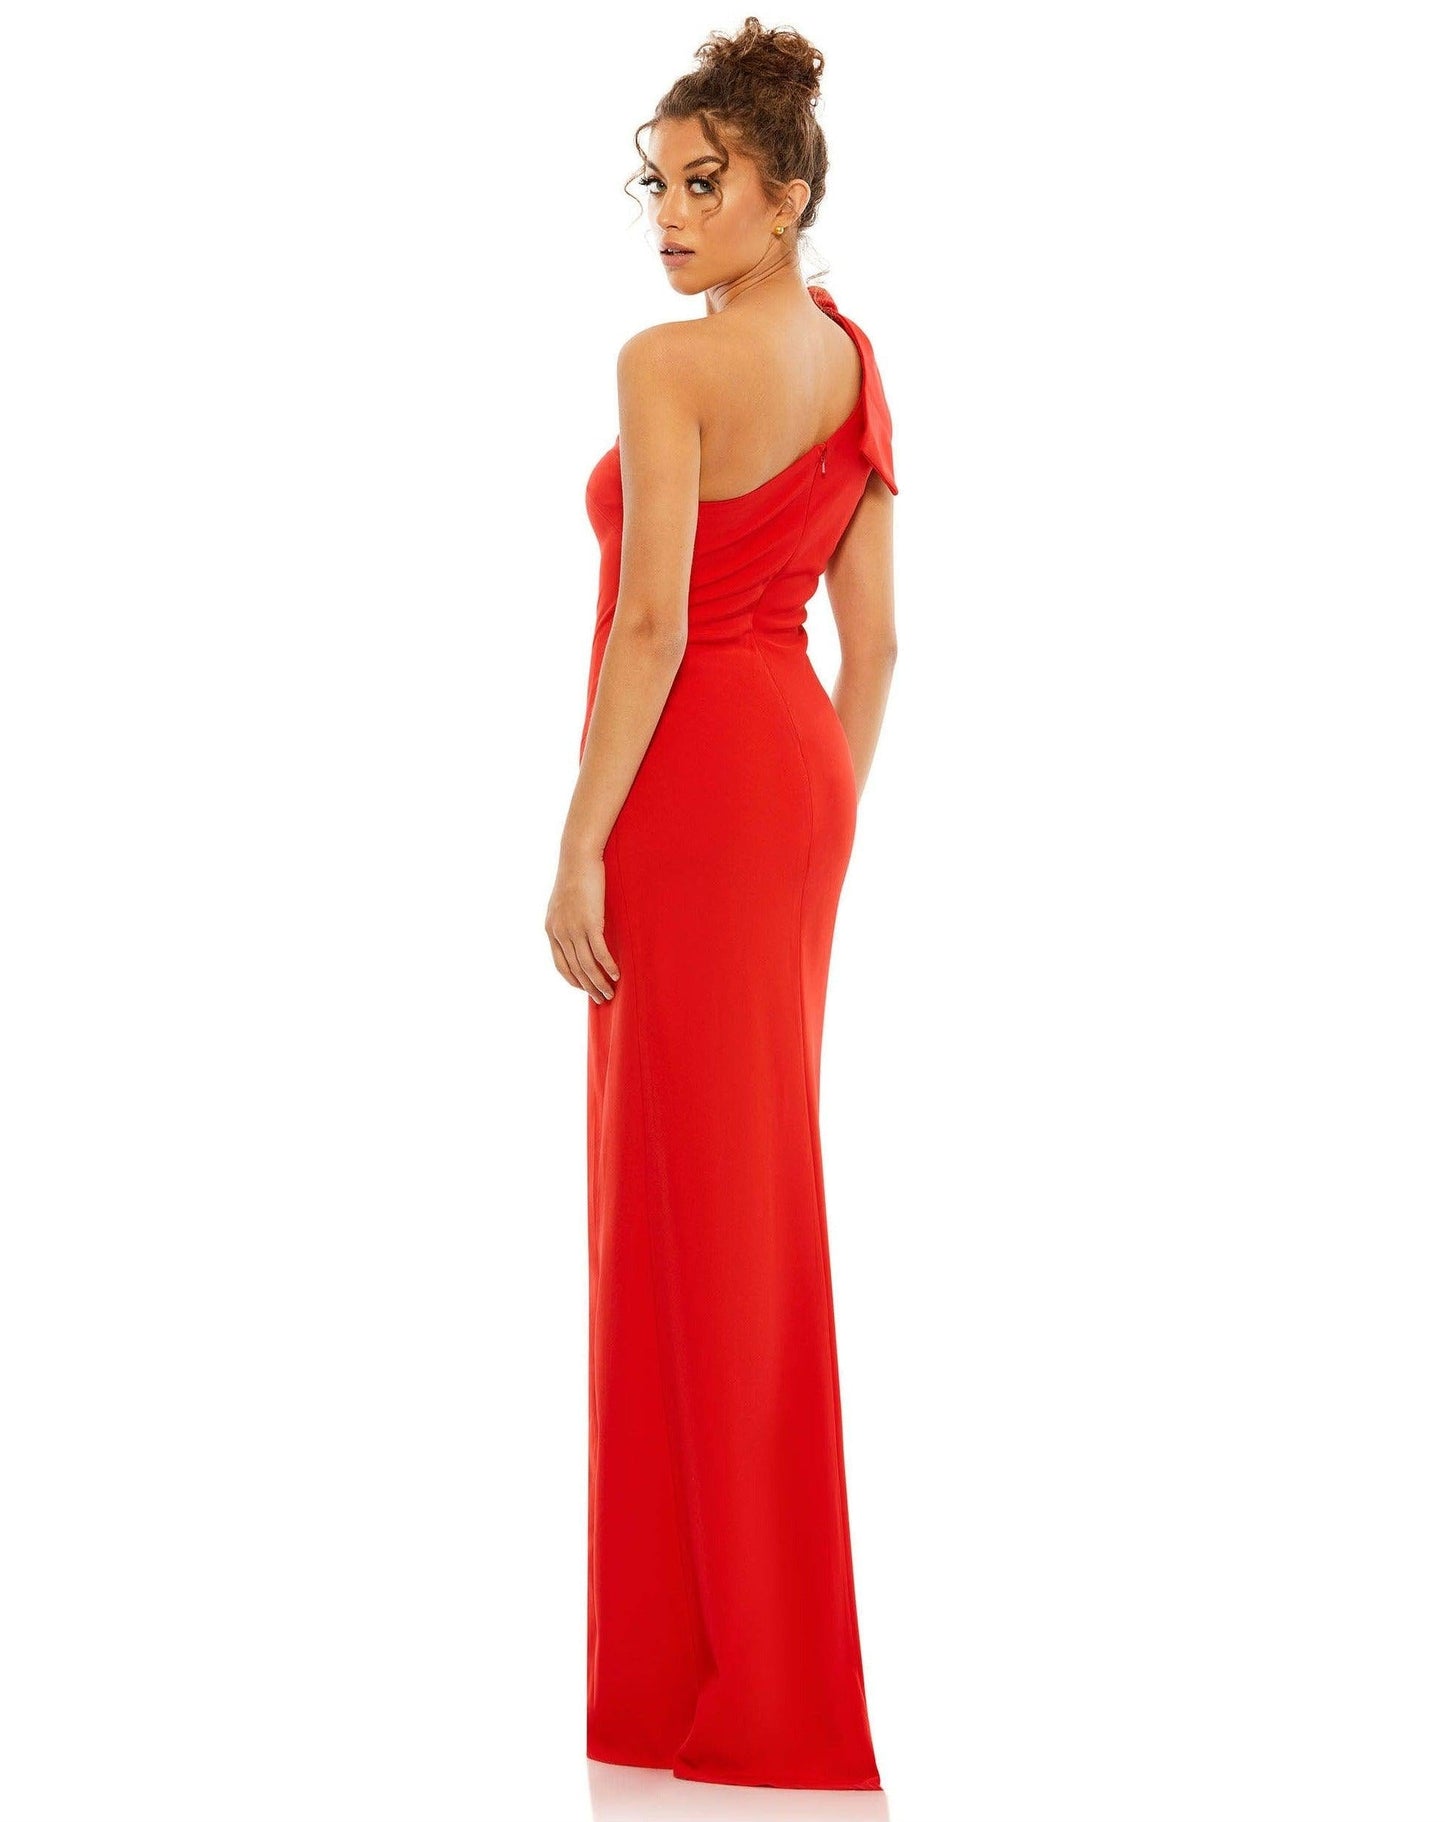 Mac Duggal Prom Long One Shoulder Formal Gown 26665 - The Dress Outlet